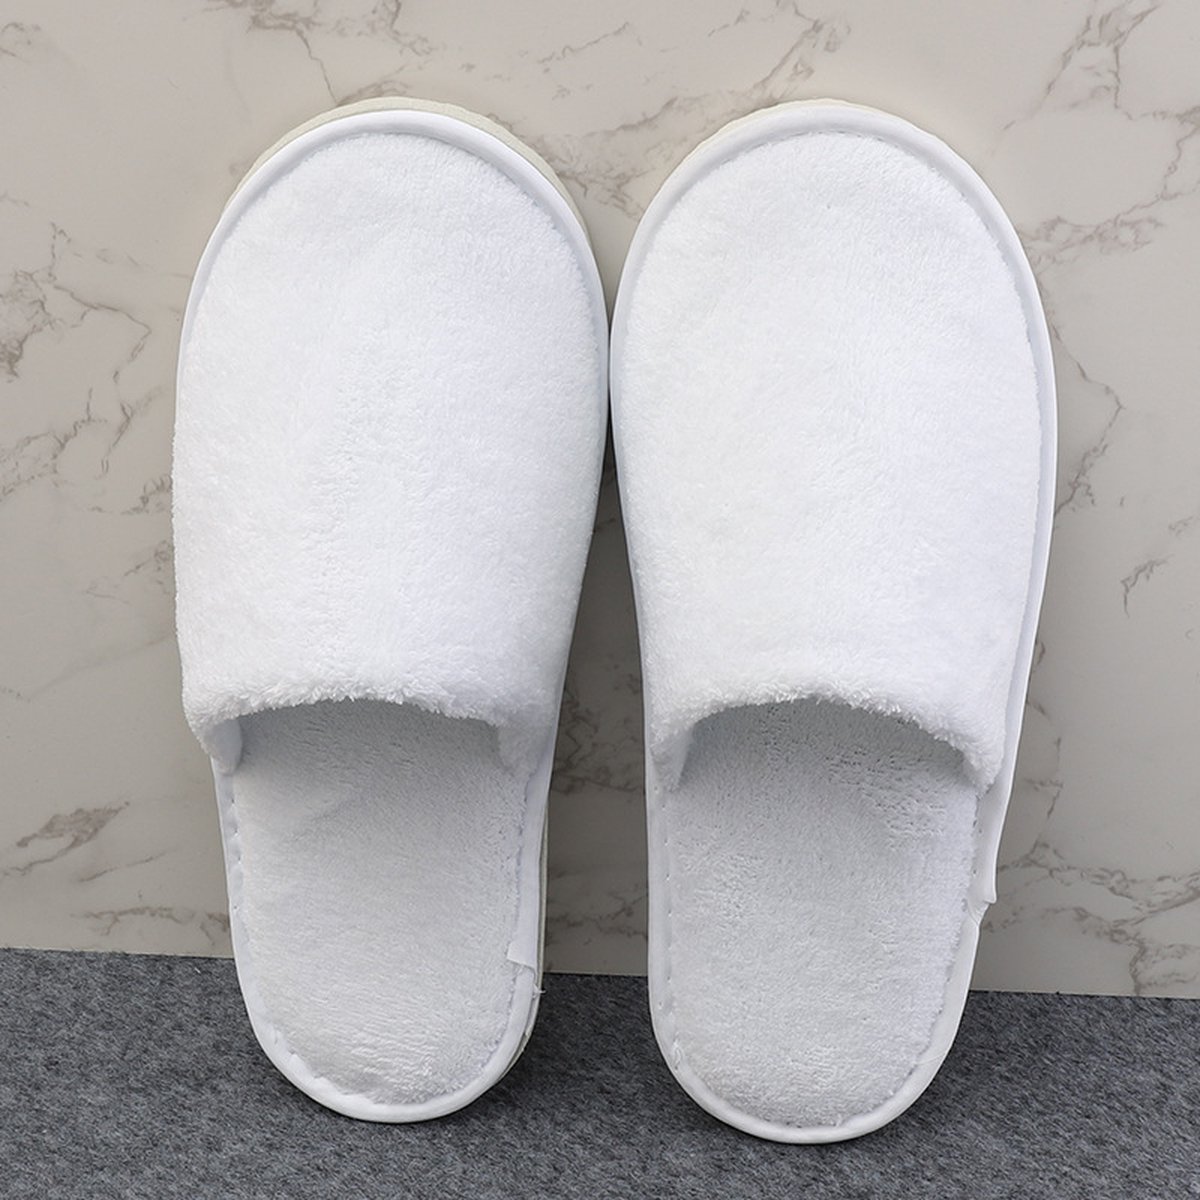 10 stuks Luxe hotel slippers coral, Hotel pantoffels coral, sloffen coral wit